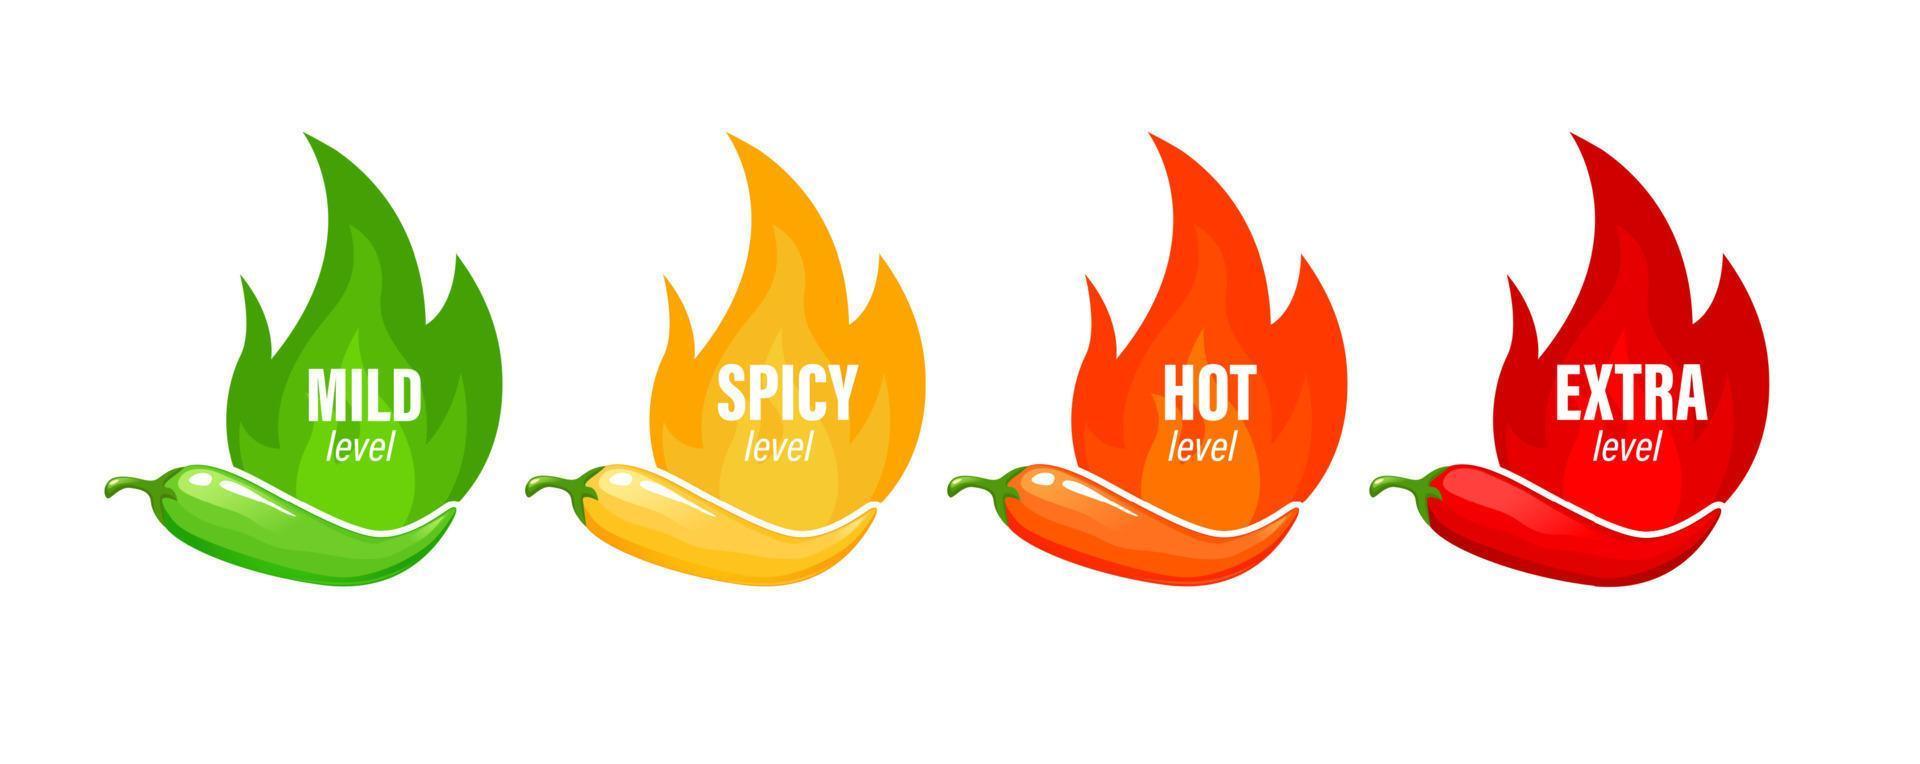 Hot spicy level labels with chili pepper and flame vector